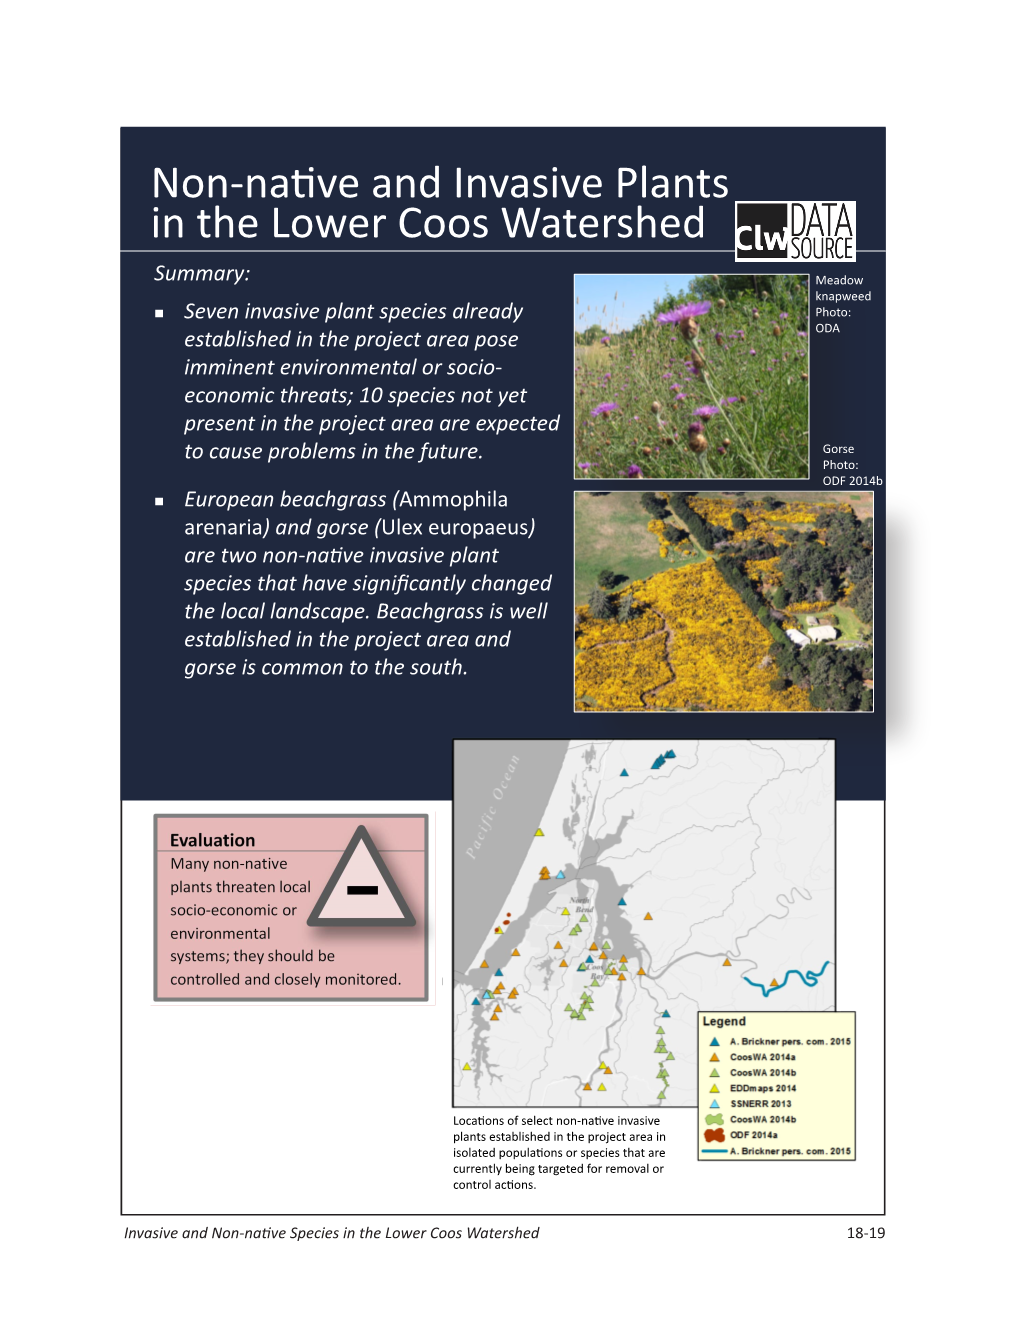 Non-Native and Invasive Plants in the Lower Coos Watershed